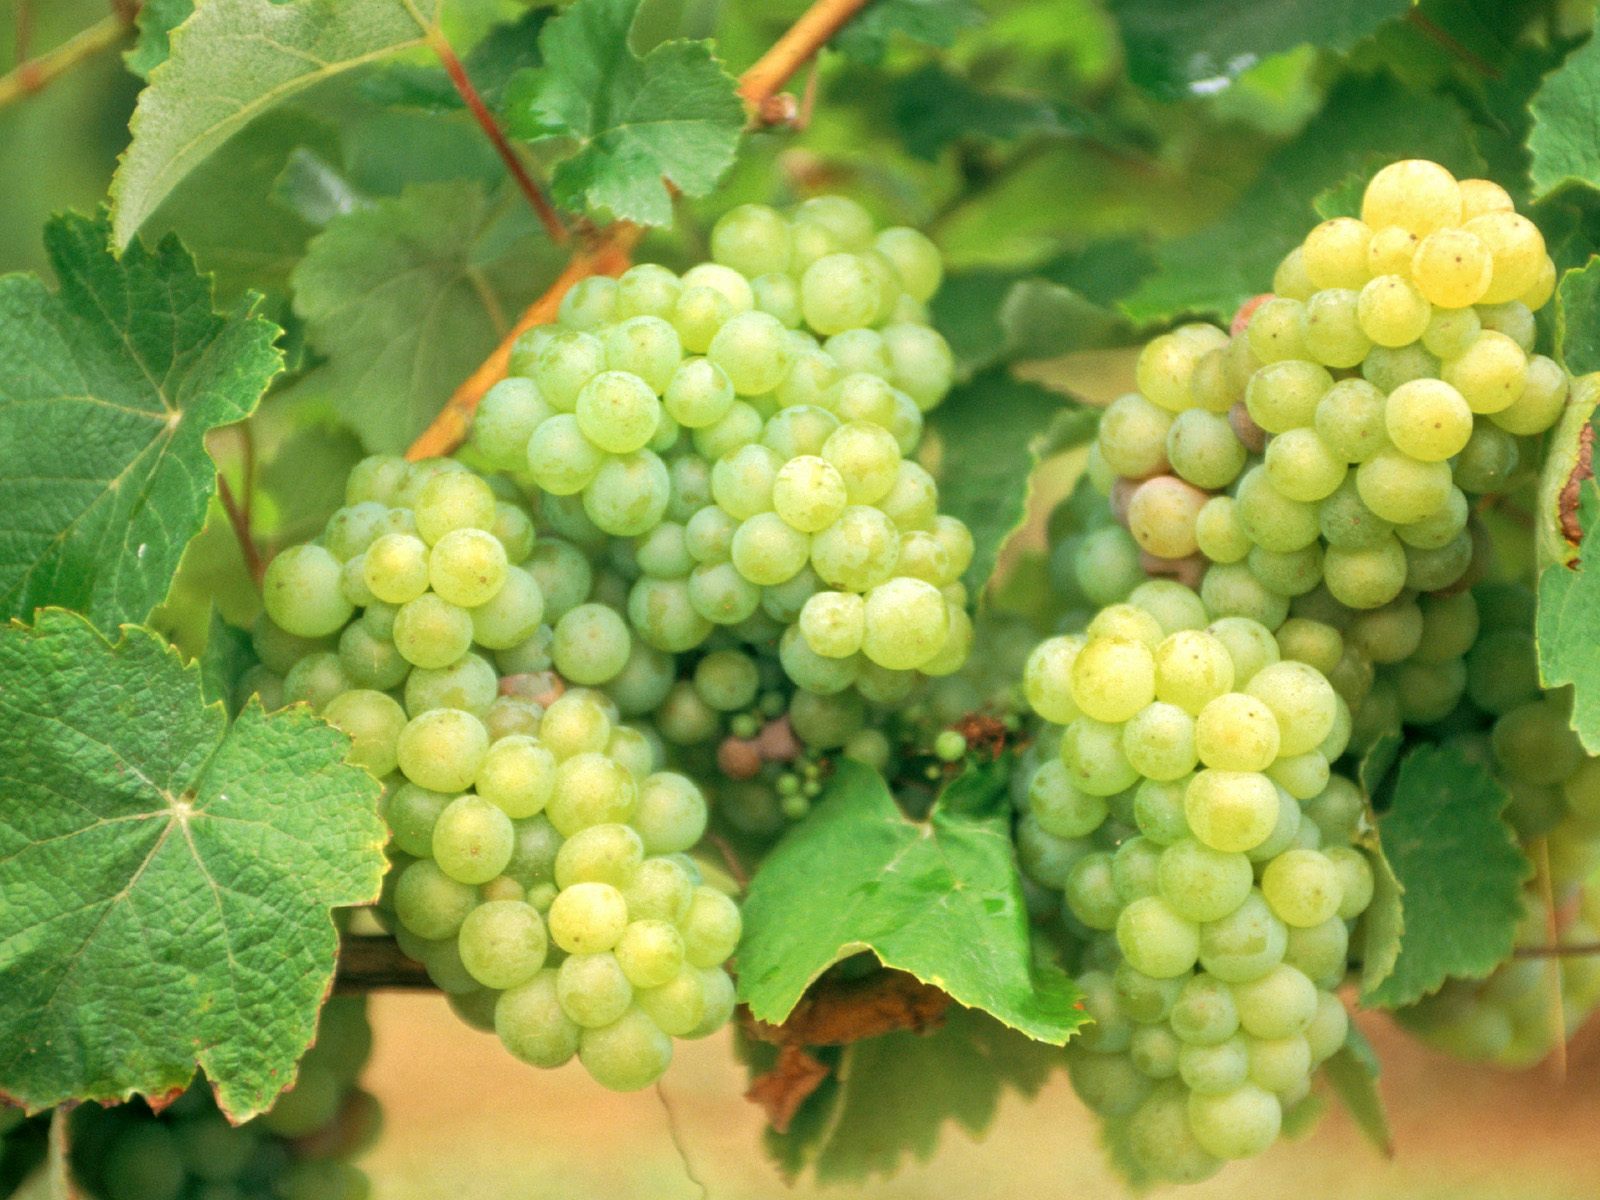 grapes picture download